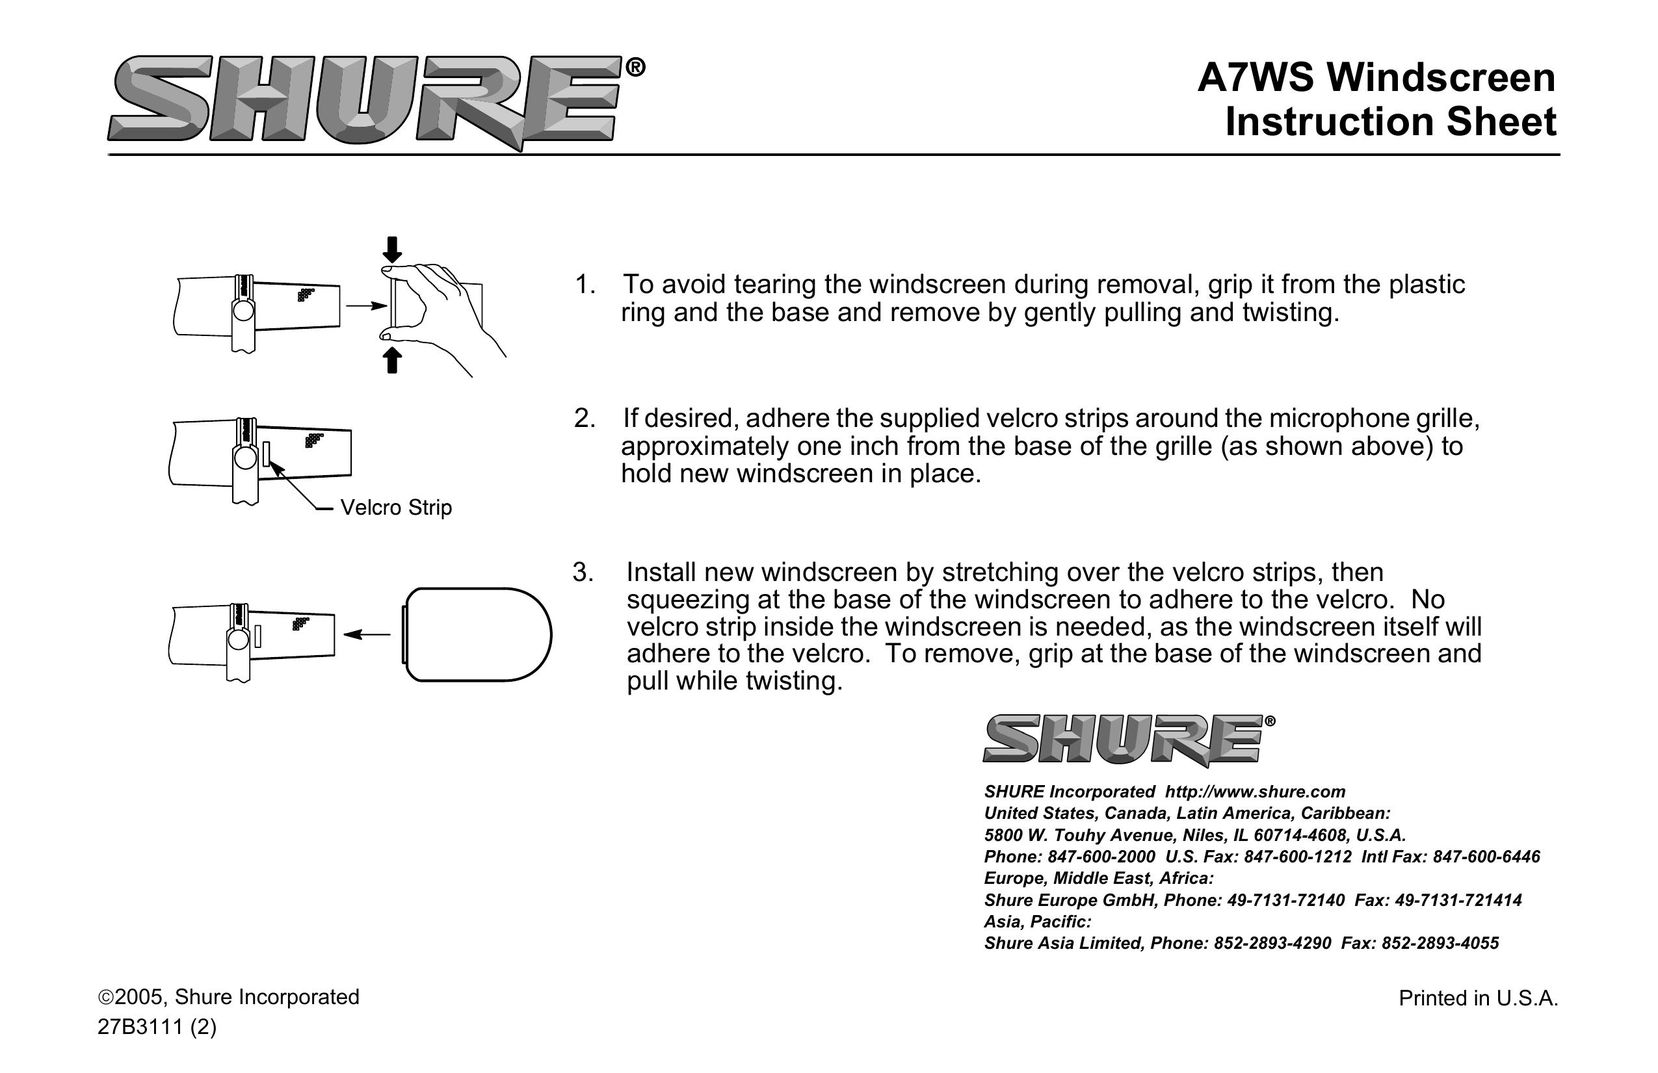 Shure A7WS Noise Reduction Machine User Manual